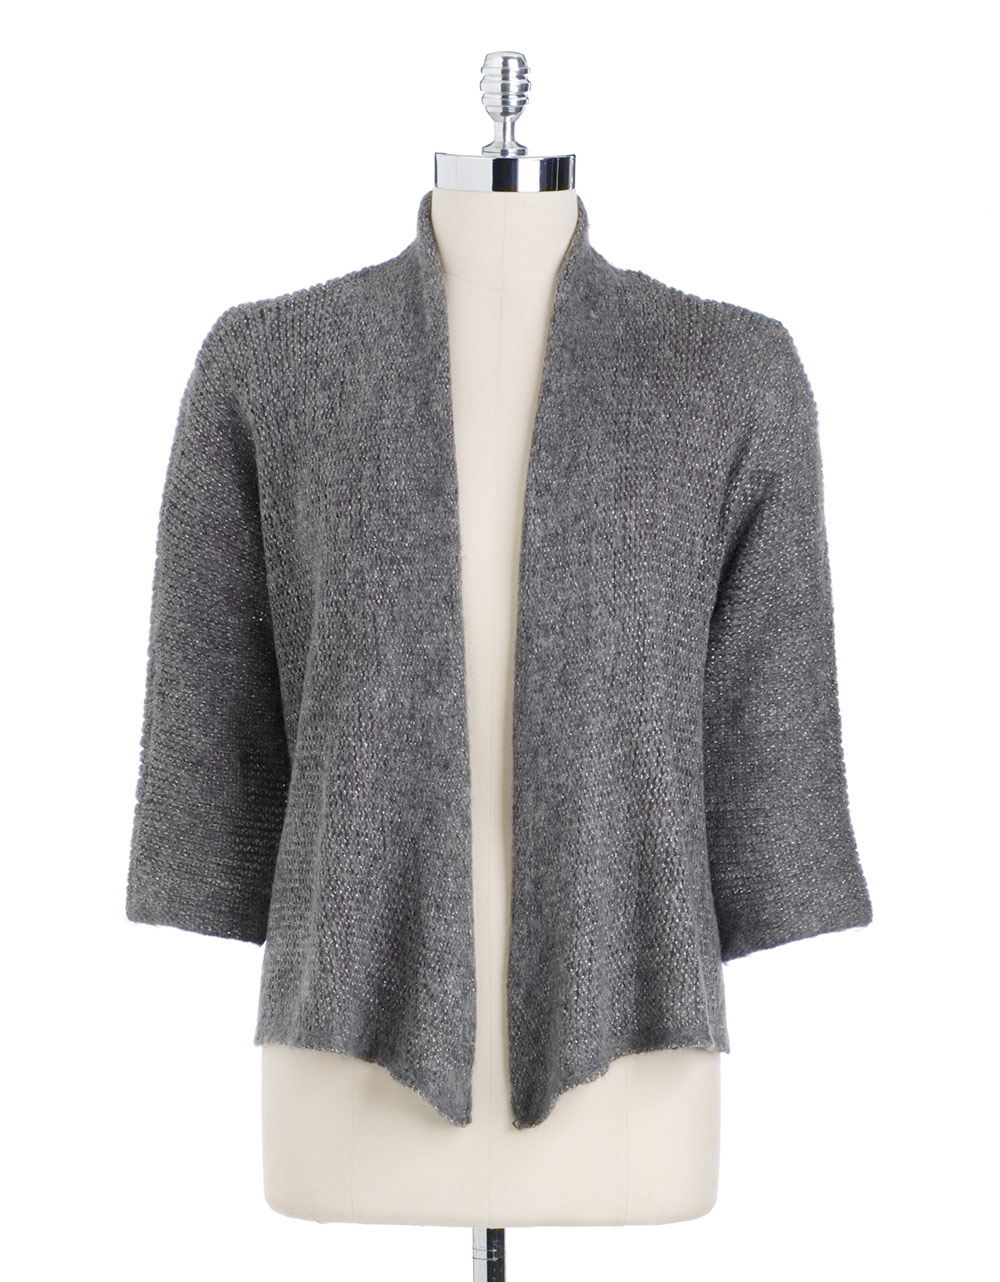 Lyst - Eileen Fisher Cropped Cardigan Sweater in Gray